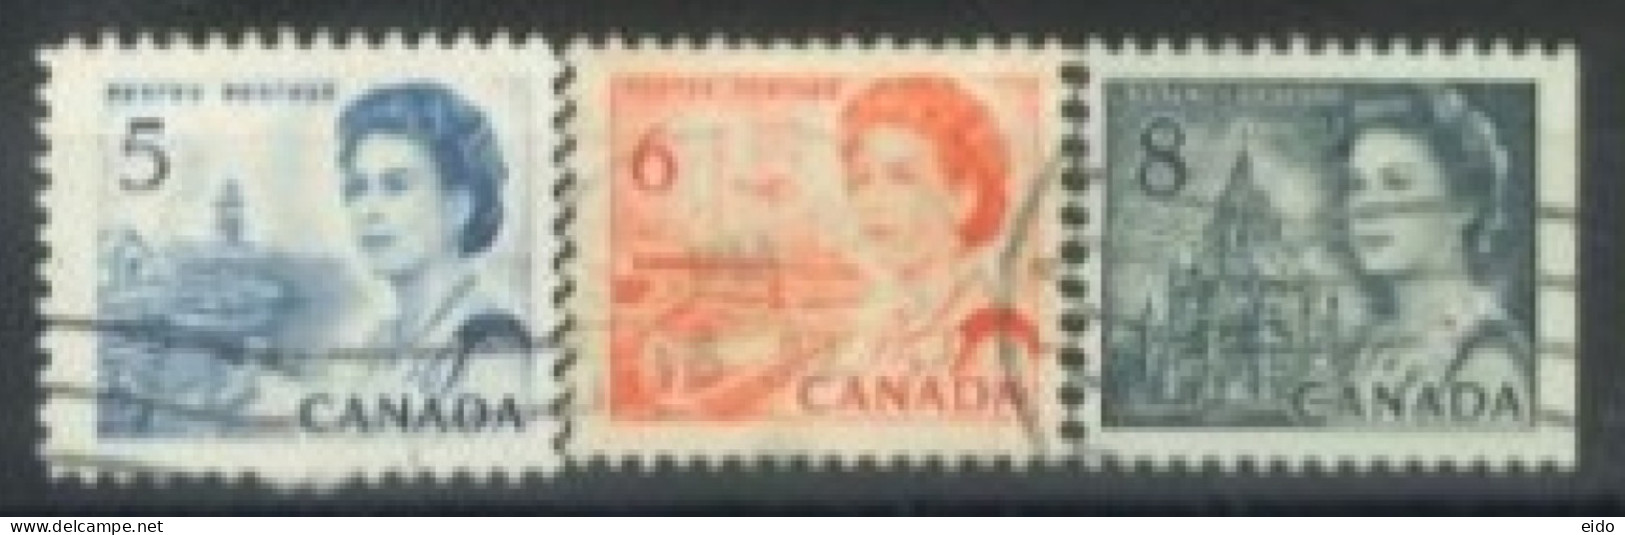 CANADA - 1967, QUEEN ELIZABETH II NORTHERN LIGHTS & DOG TEAM STAMPS SET OF 3, USED. - Used Stamps